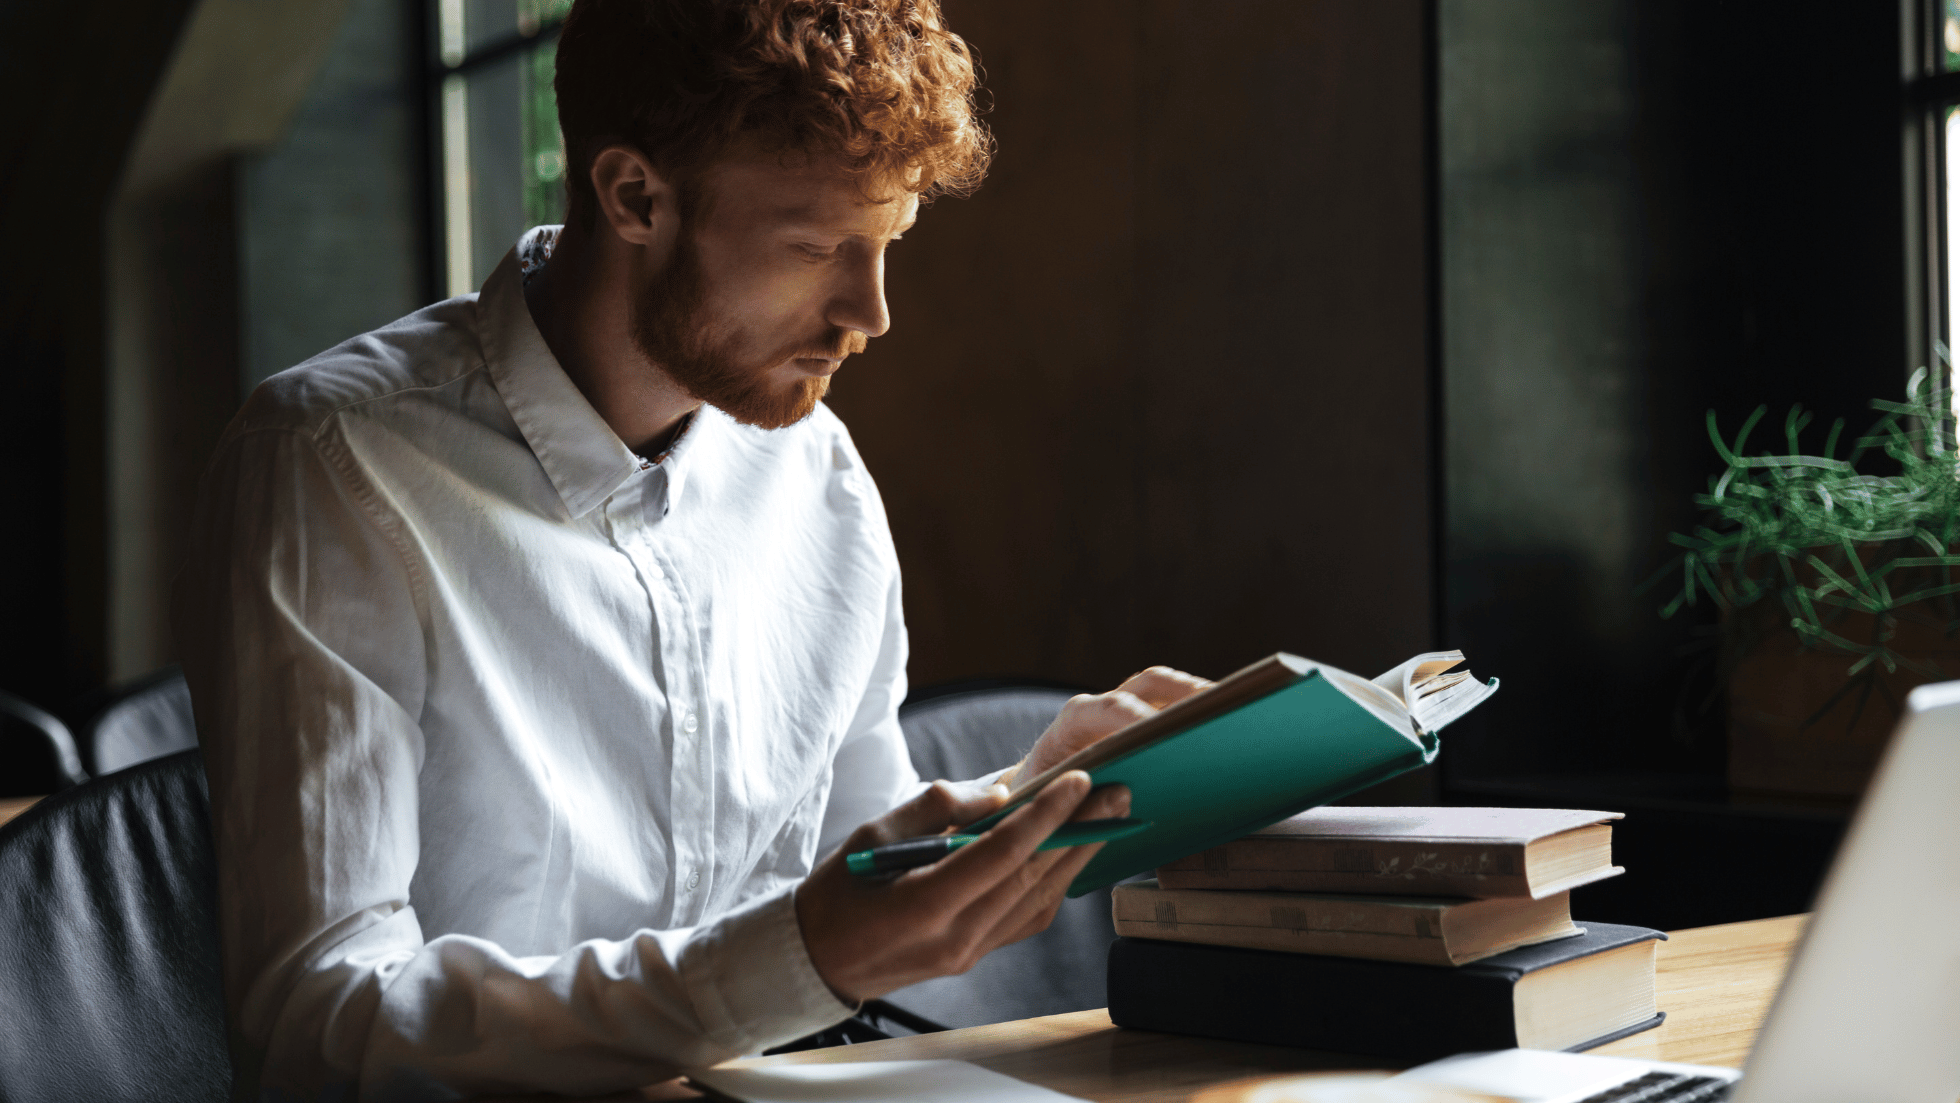 Young man with curly hair and short beard wearing a white button-up shirt holds a small notebook with advice from his dear mother. These make great high school graduate gifts.